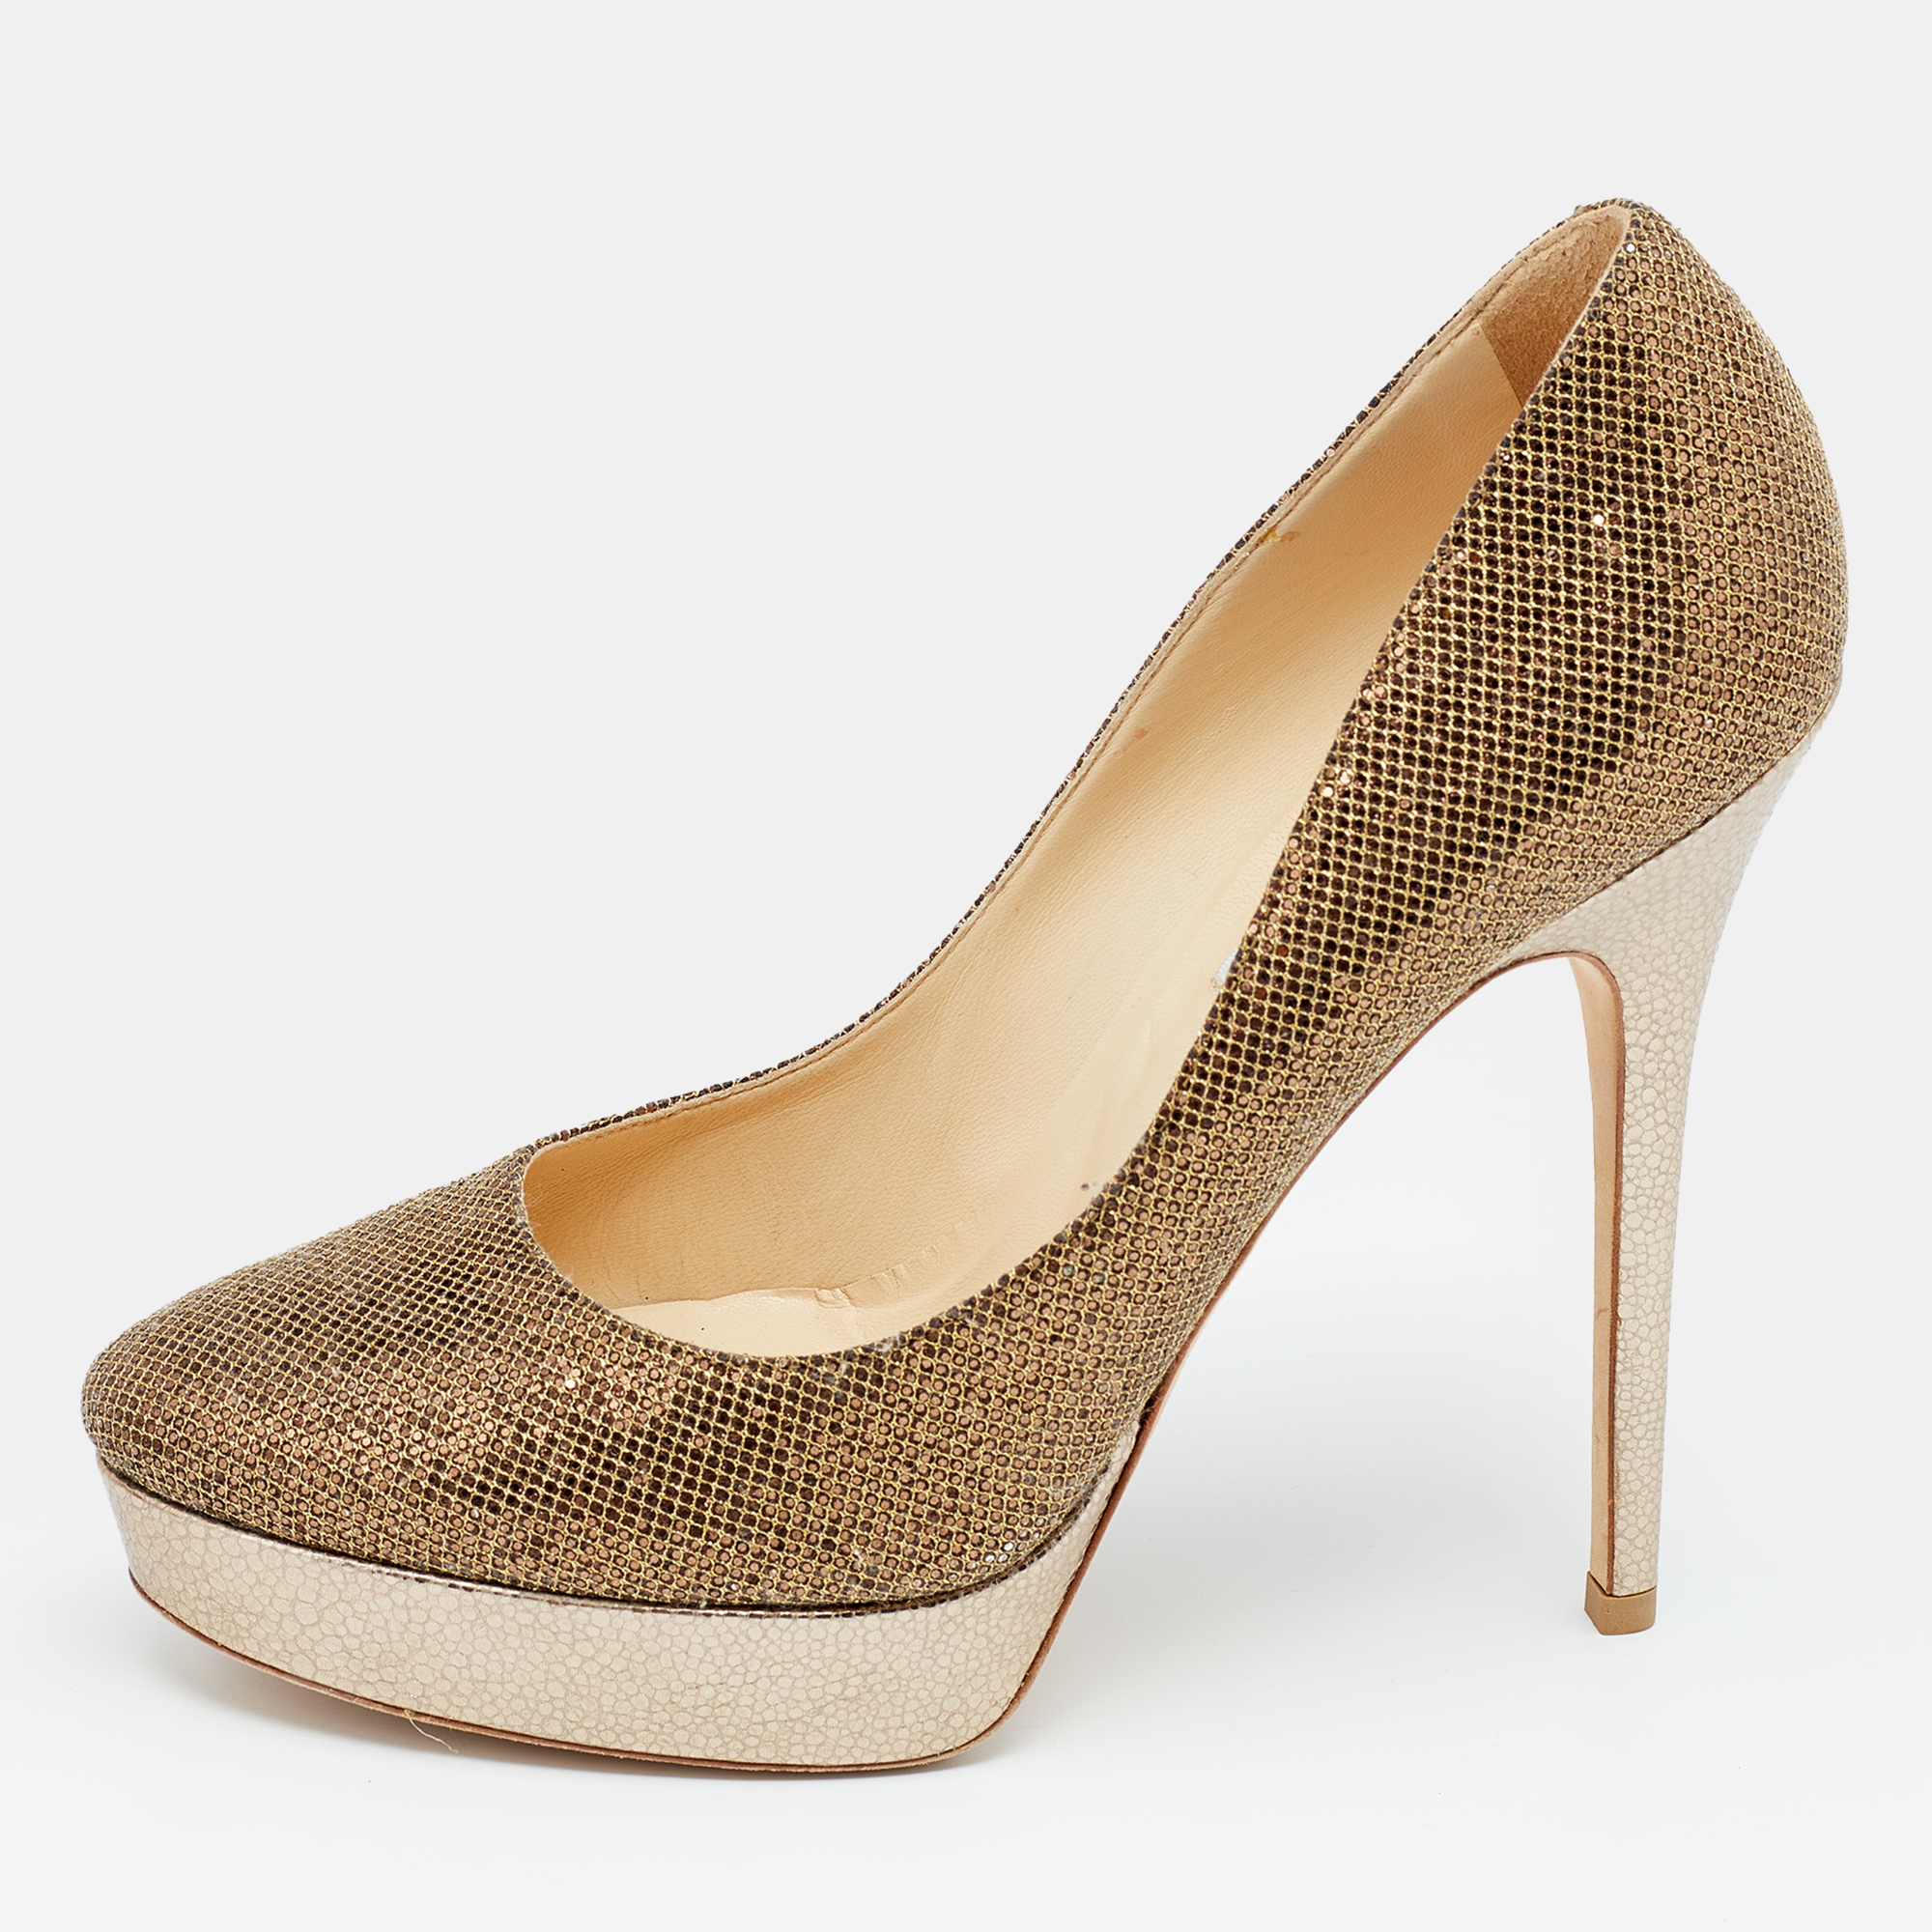 Jimmy Choo Gold Glitter Fabric And Embossed Leather Eros Platform Pumps Size 40